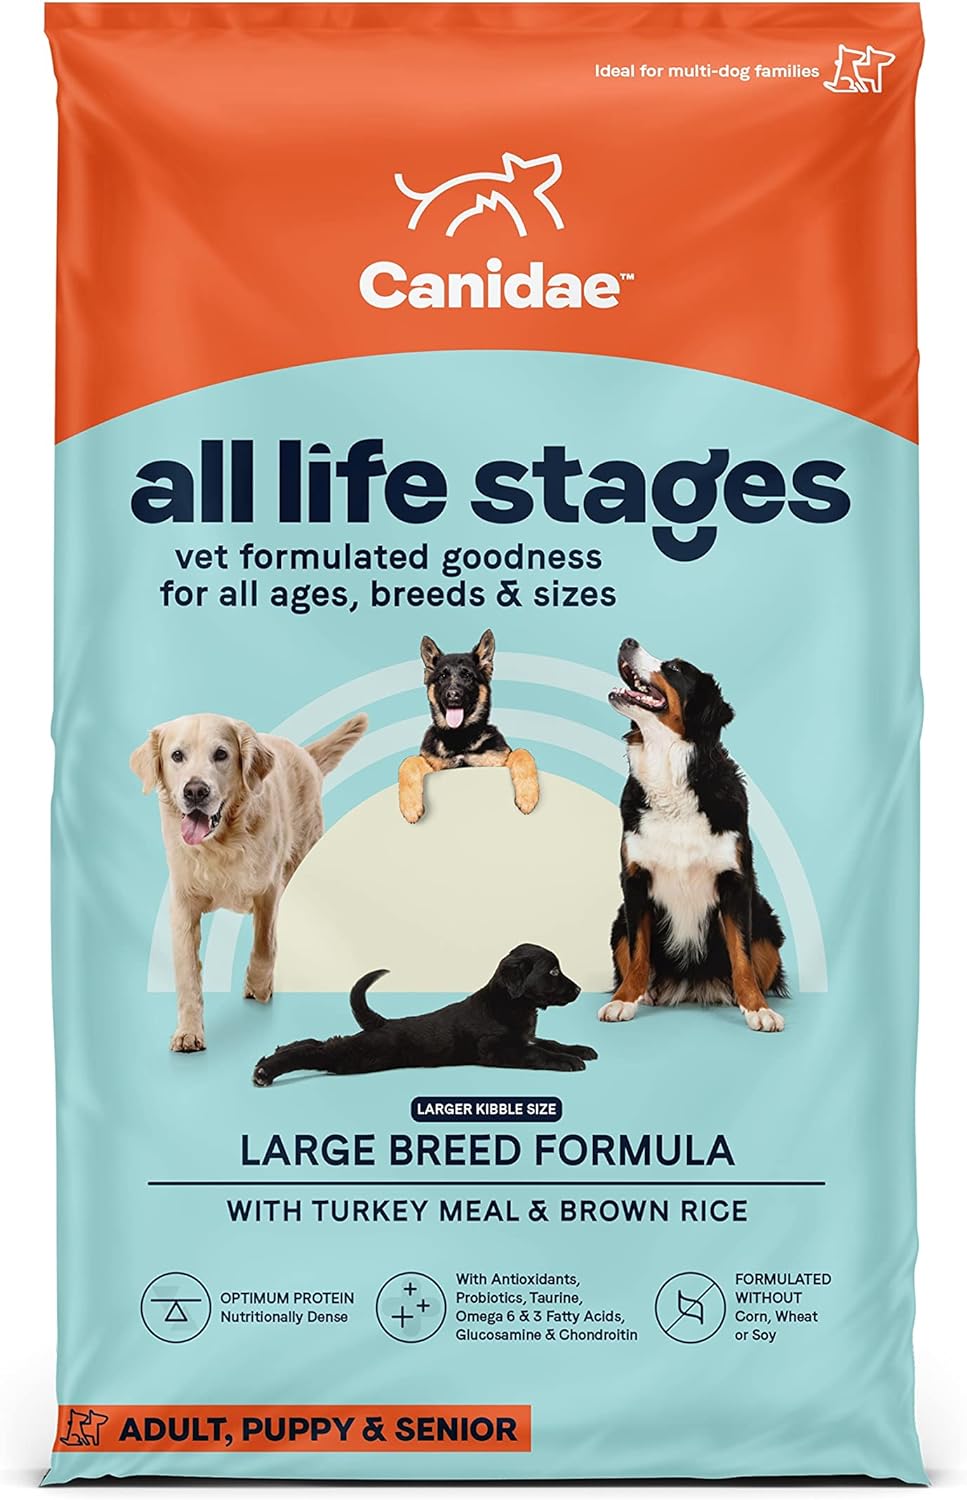 Canidae All Life Stages Large Breed Formula Turkey Meal & Brown Rice Dry Dog Food – Gallery Image 1